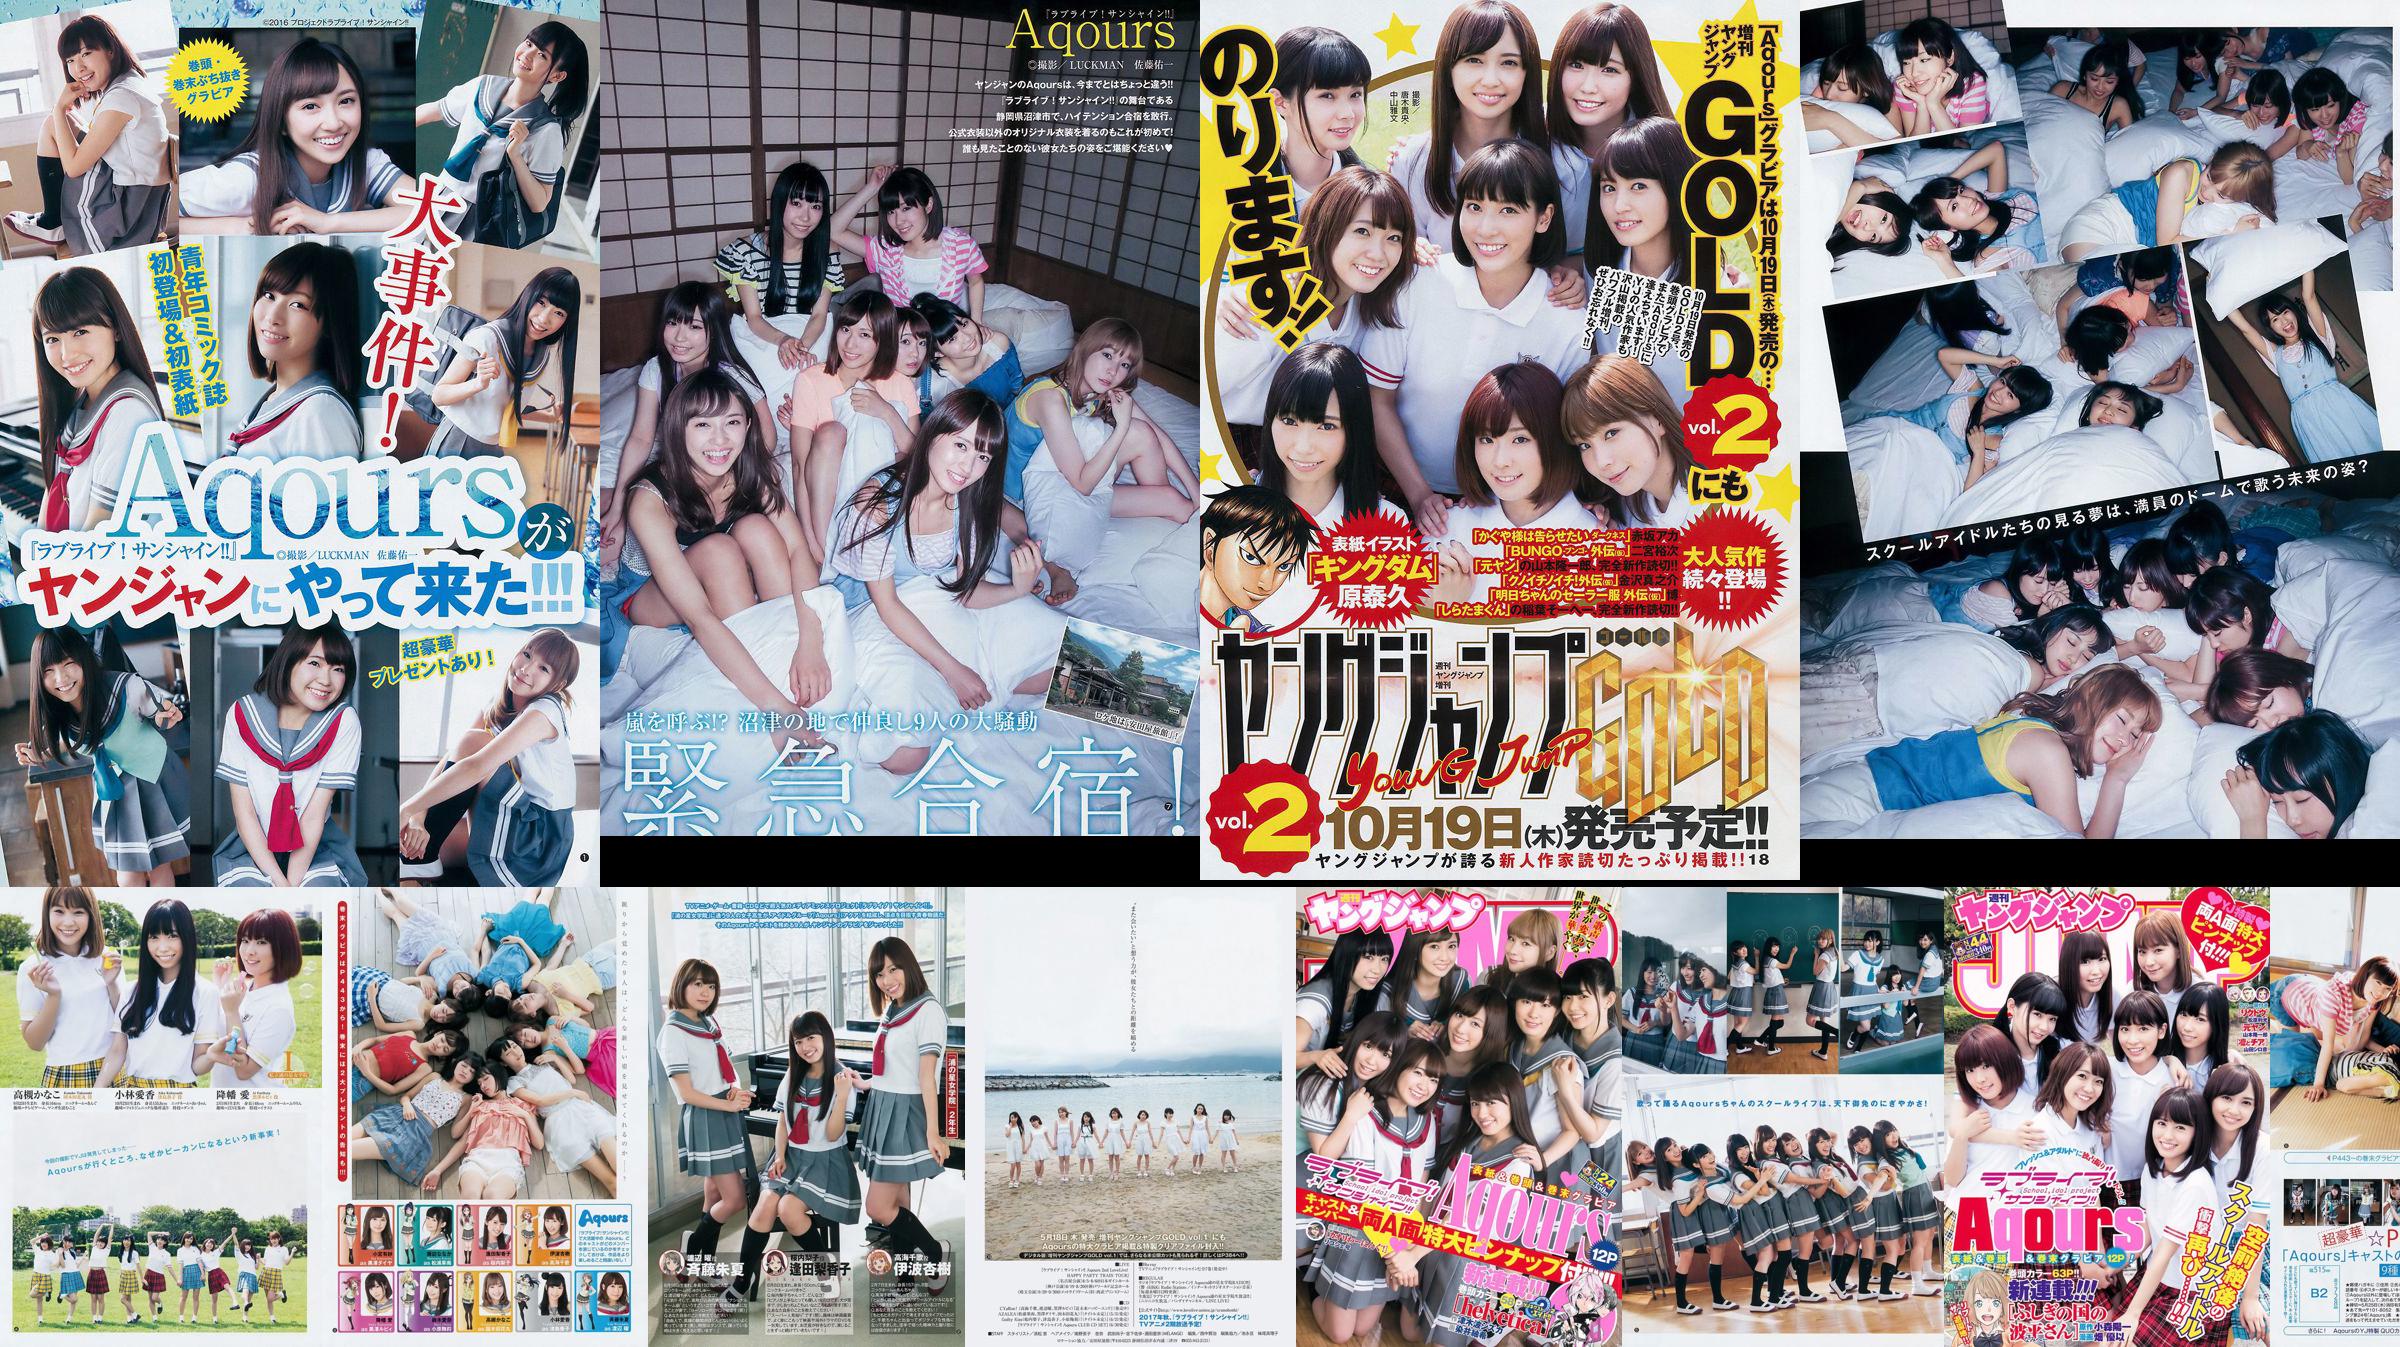 Japan Combination Aqours [Weekly Young Jump] Magazine photo n ° 44 2017 No.880c4f Page 1